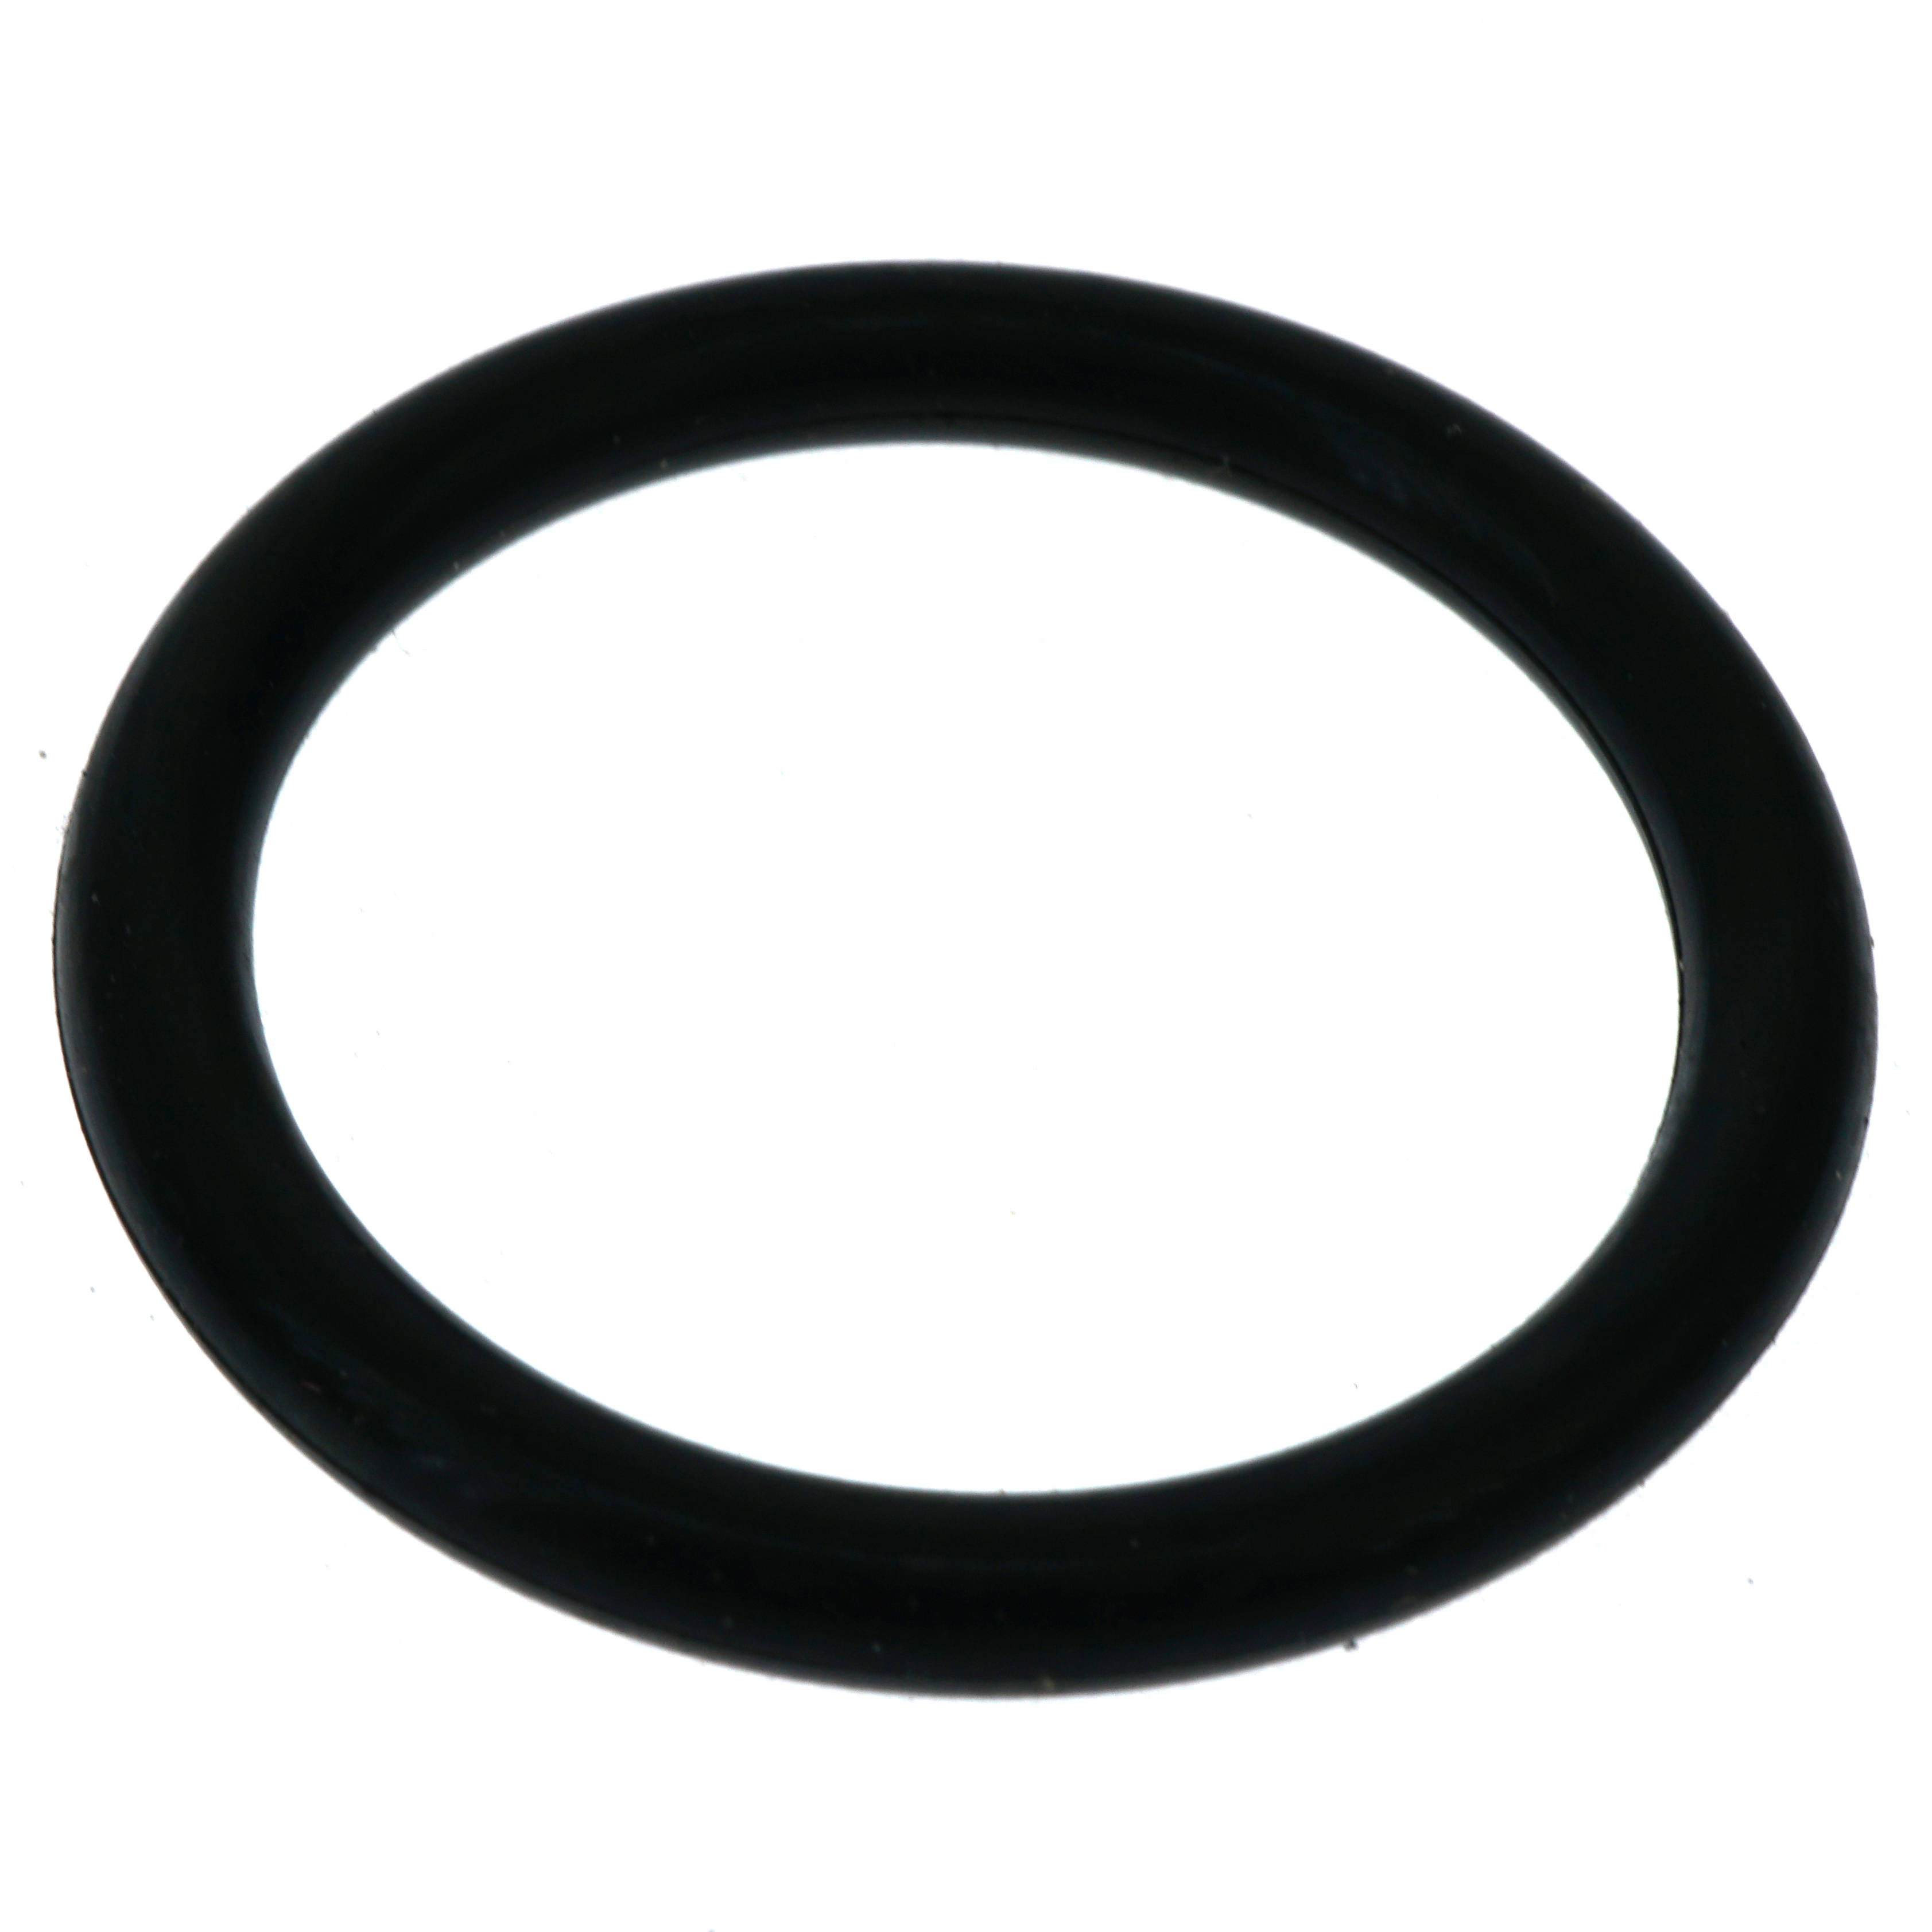 22mm ID 28mm OD 3mm Cross-Section G22 Metric 2x Nitrile Rubber O-Rings 